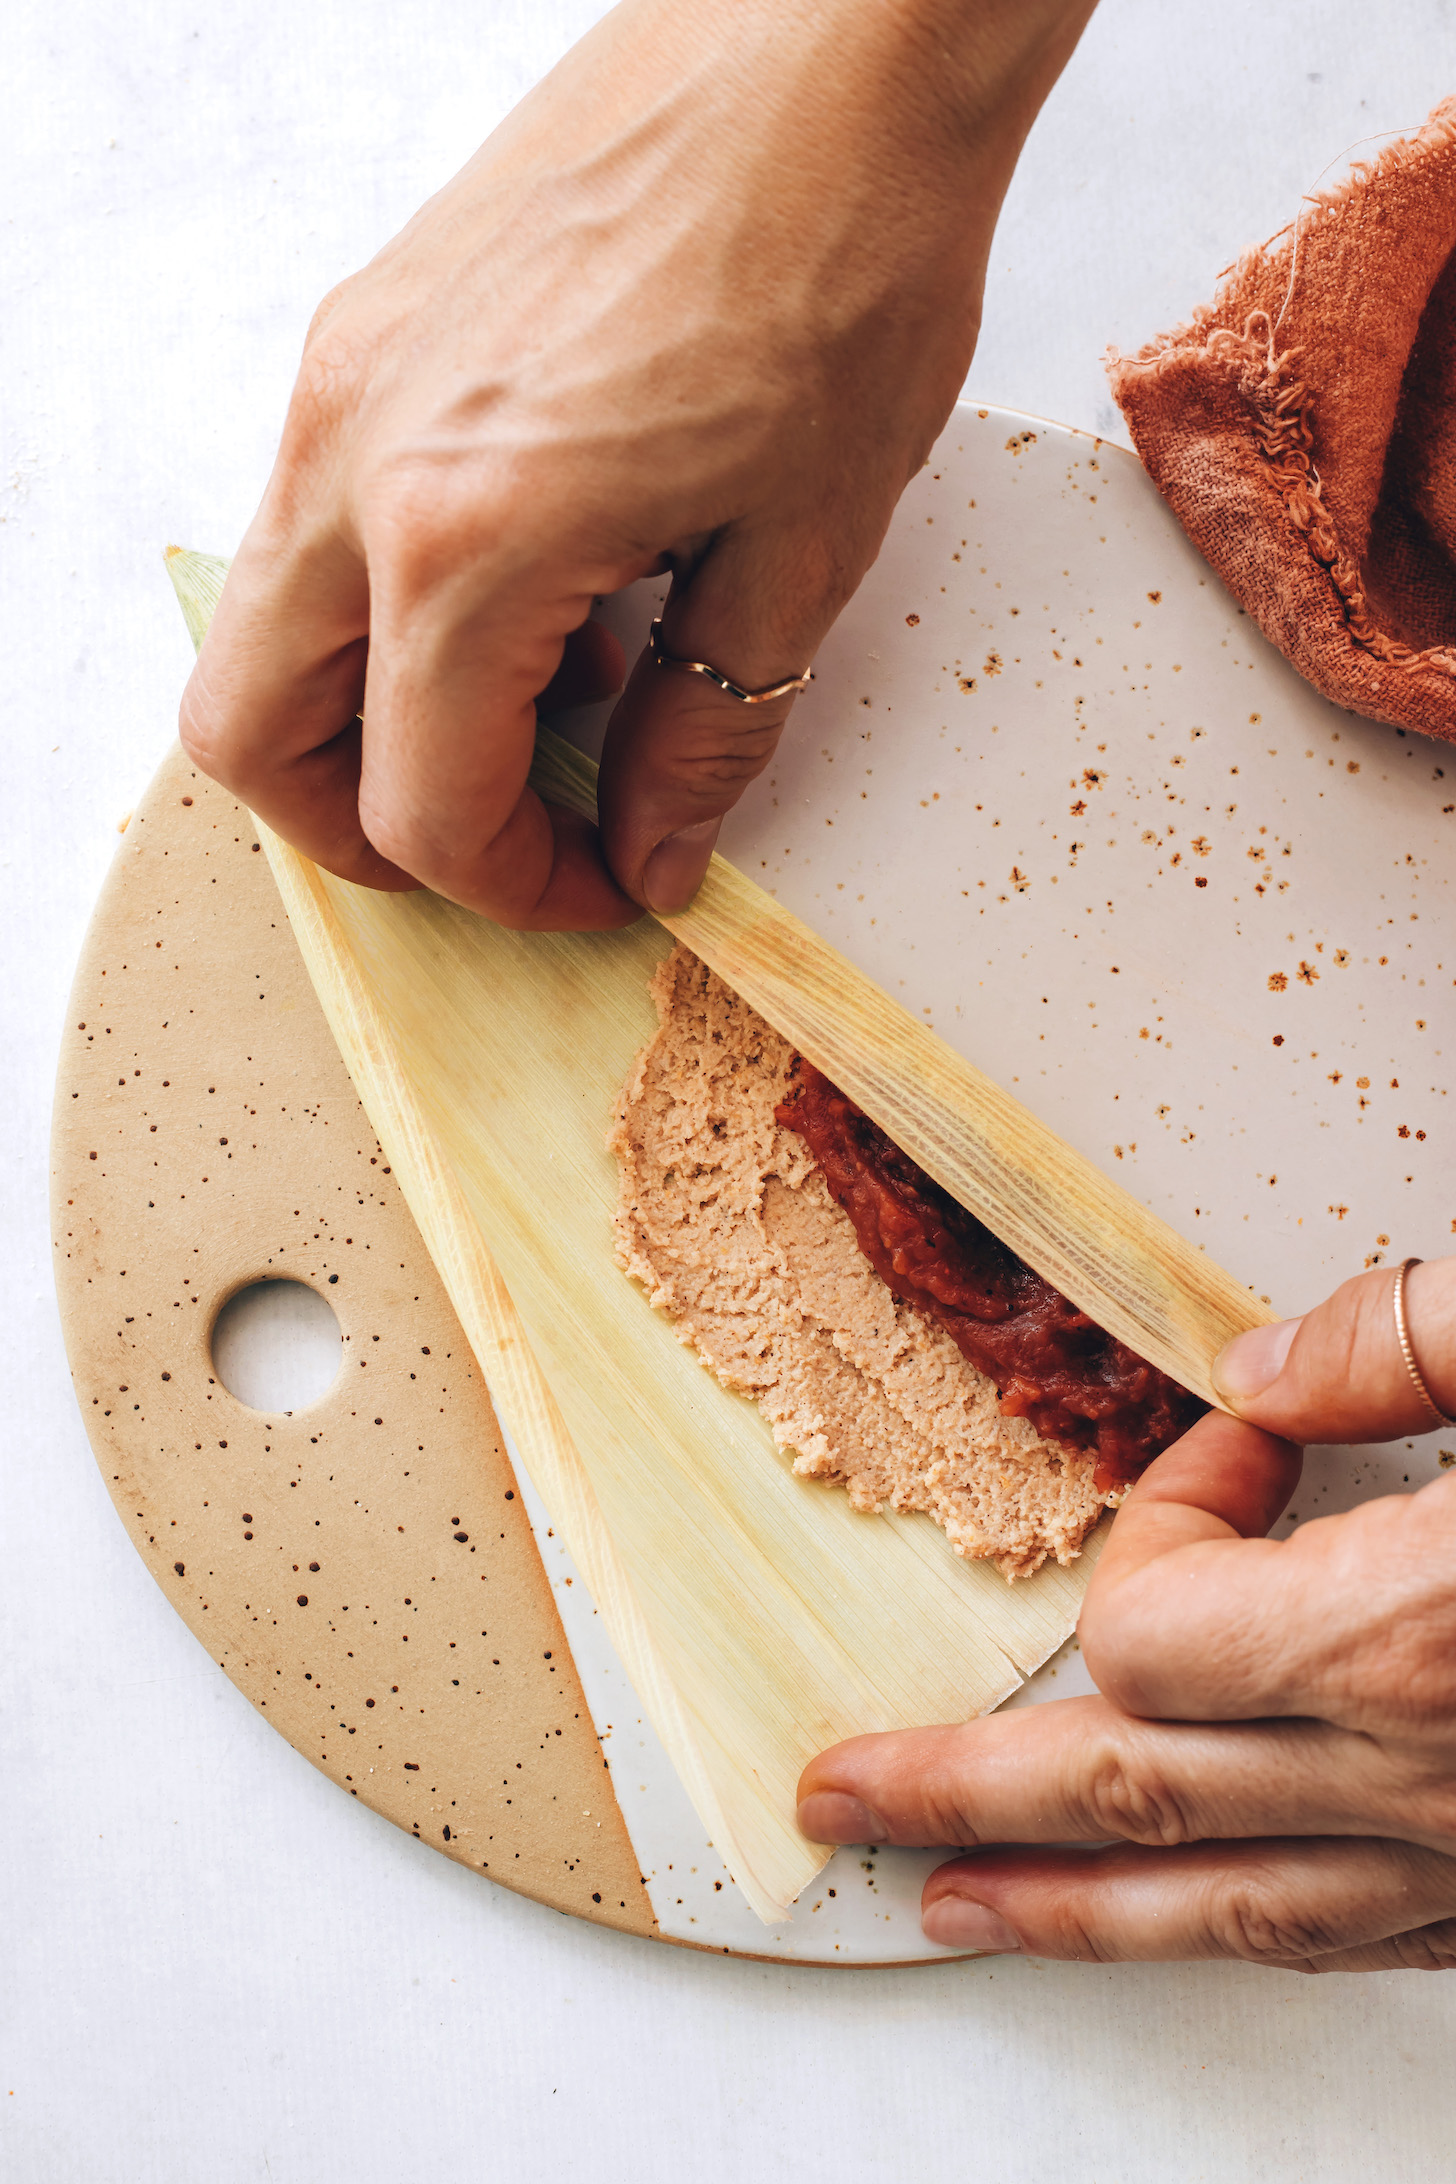 Folding a corn husk over masa filling and apple butter